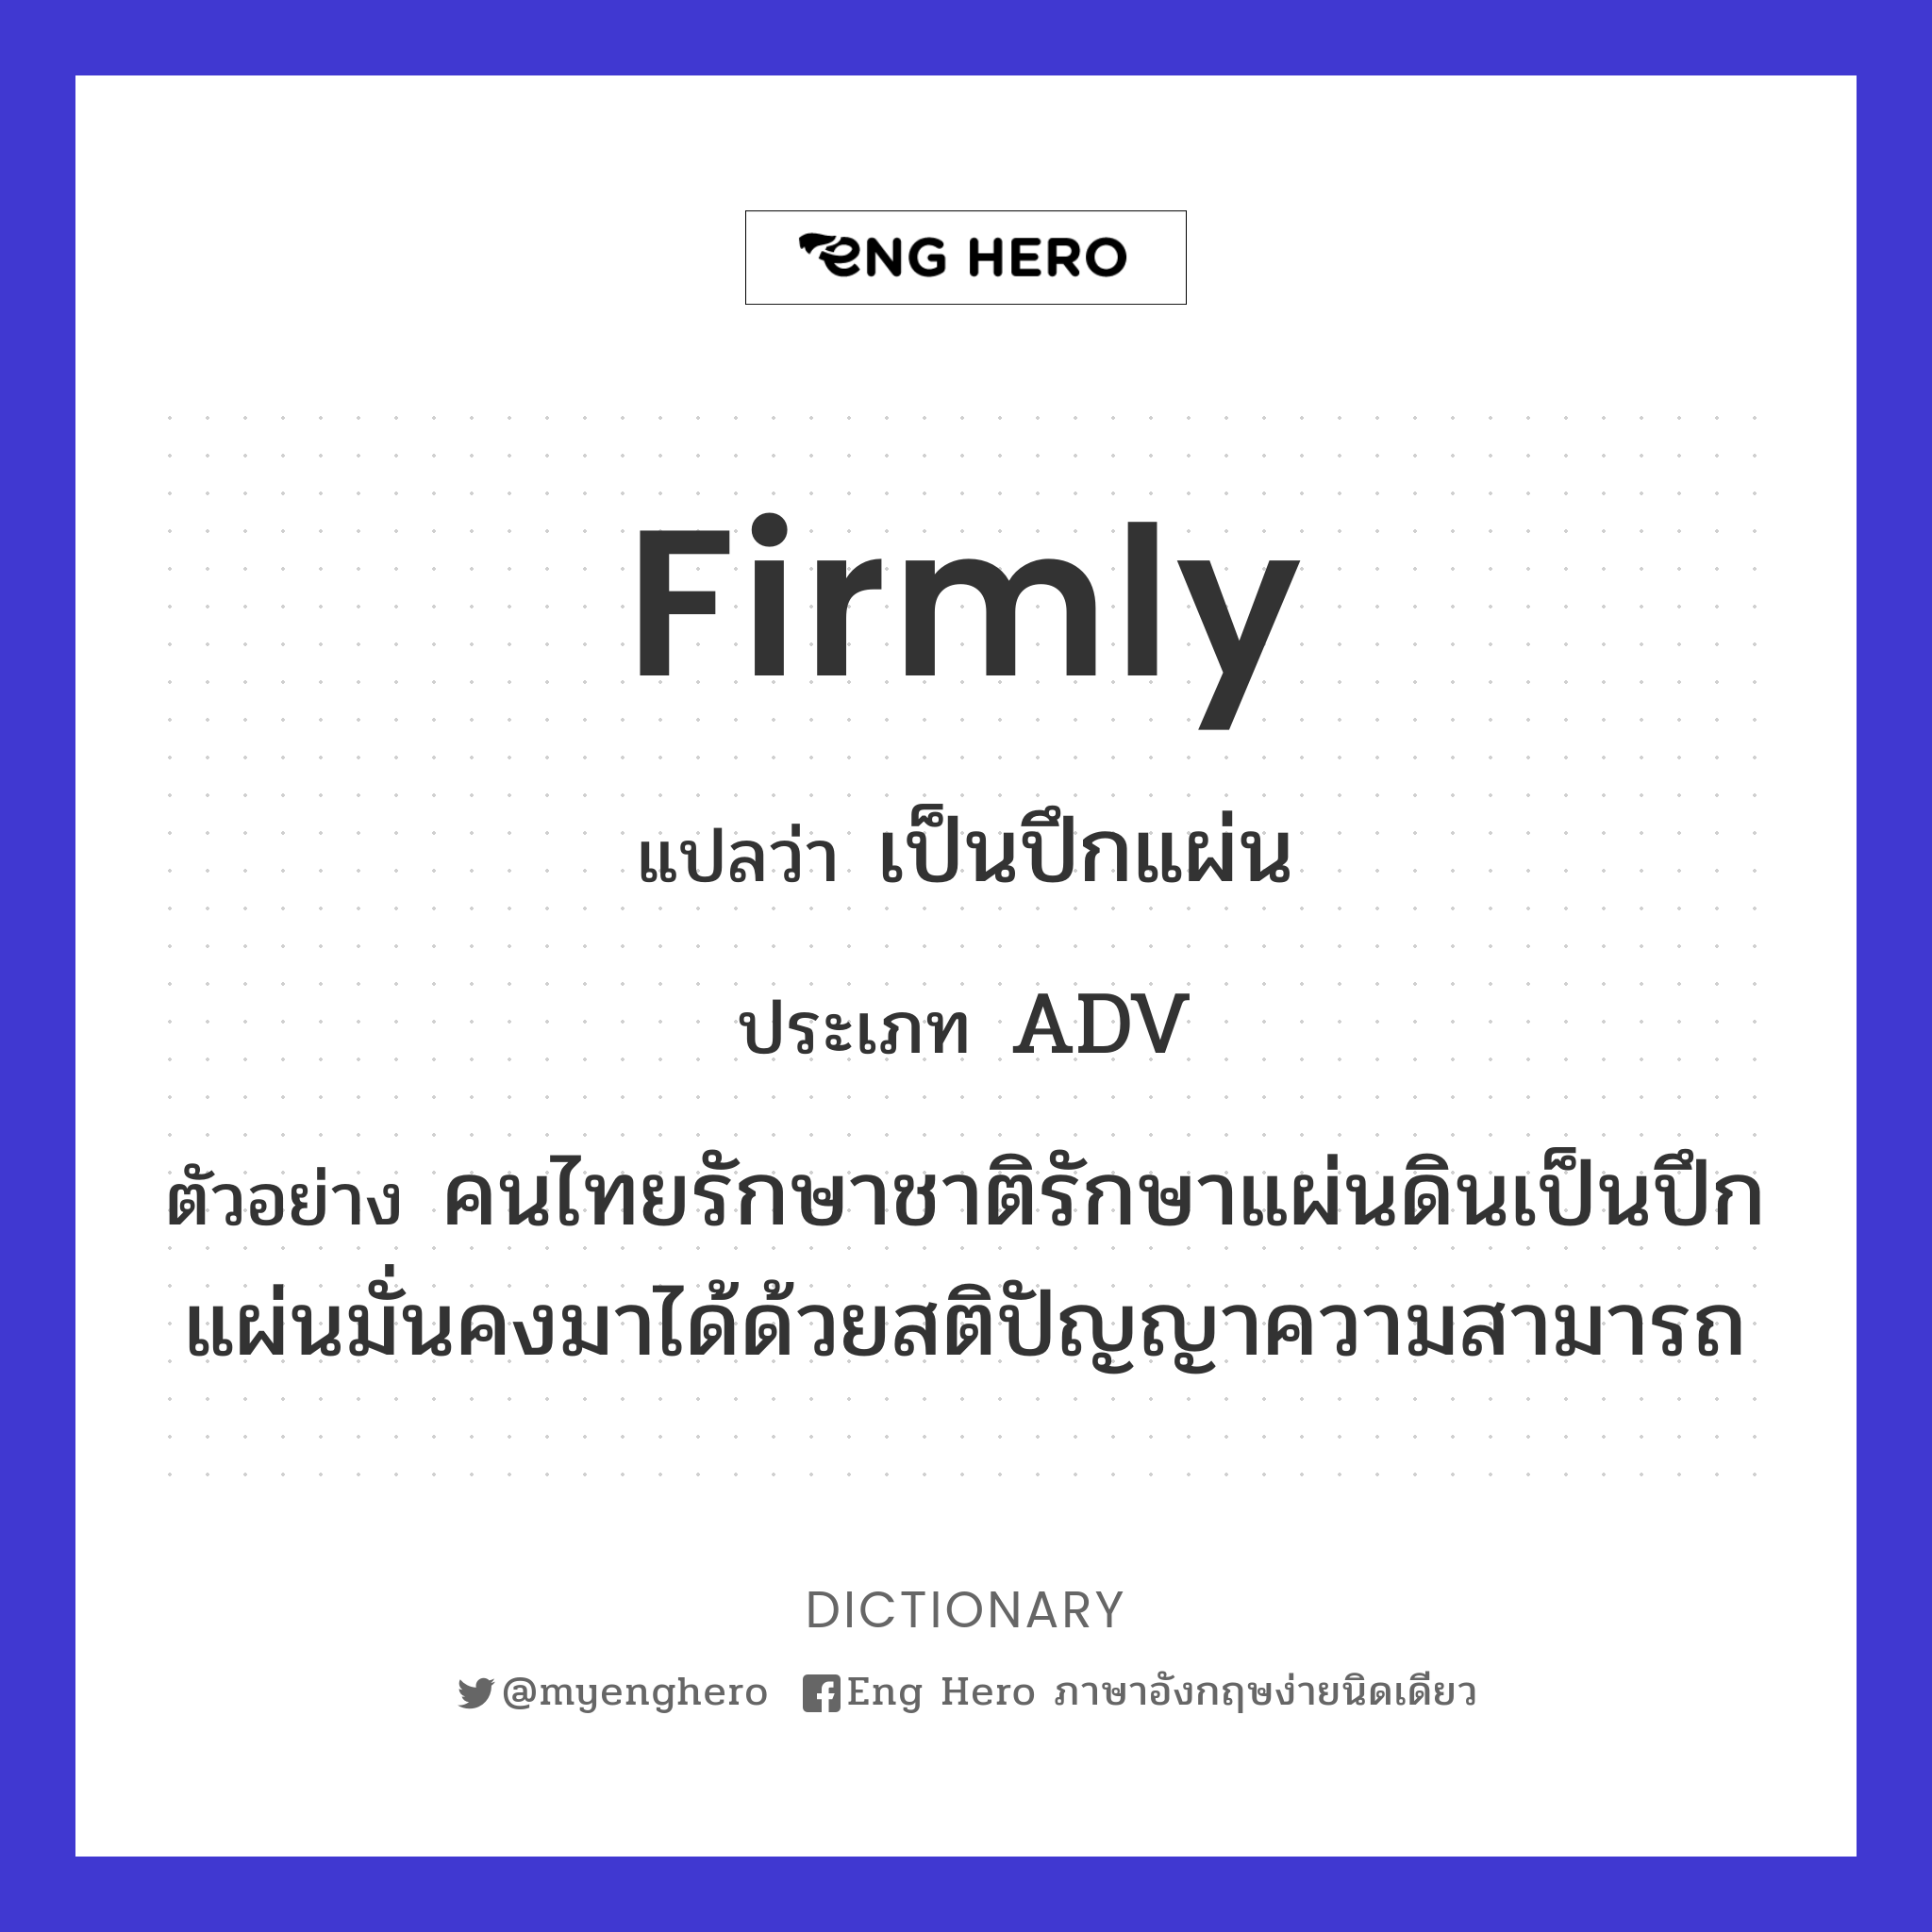 firmly